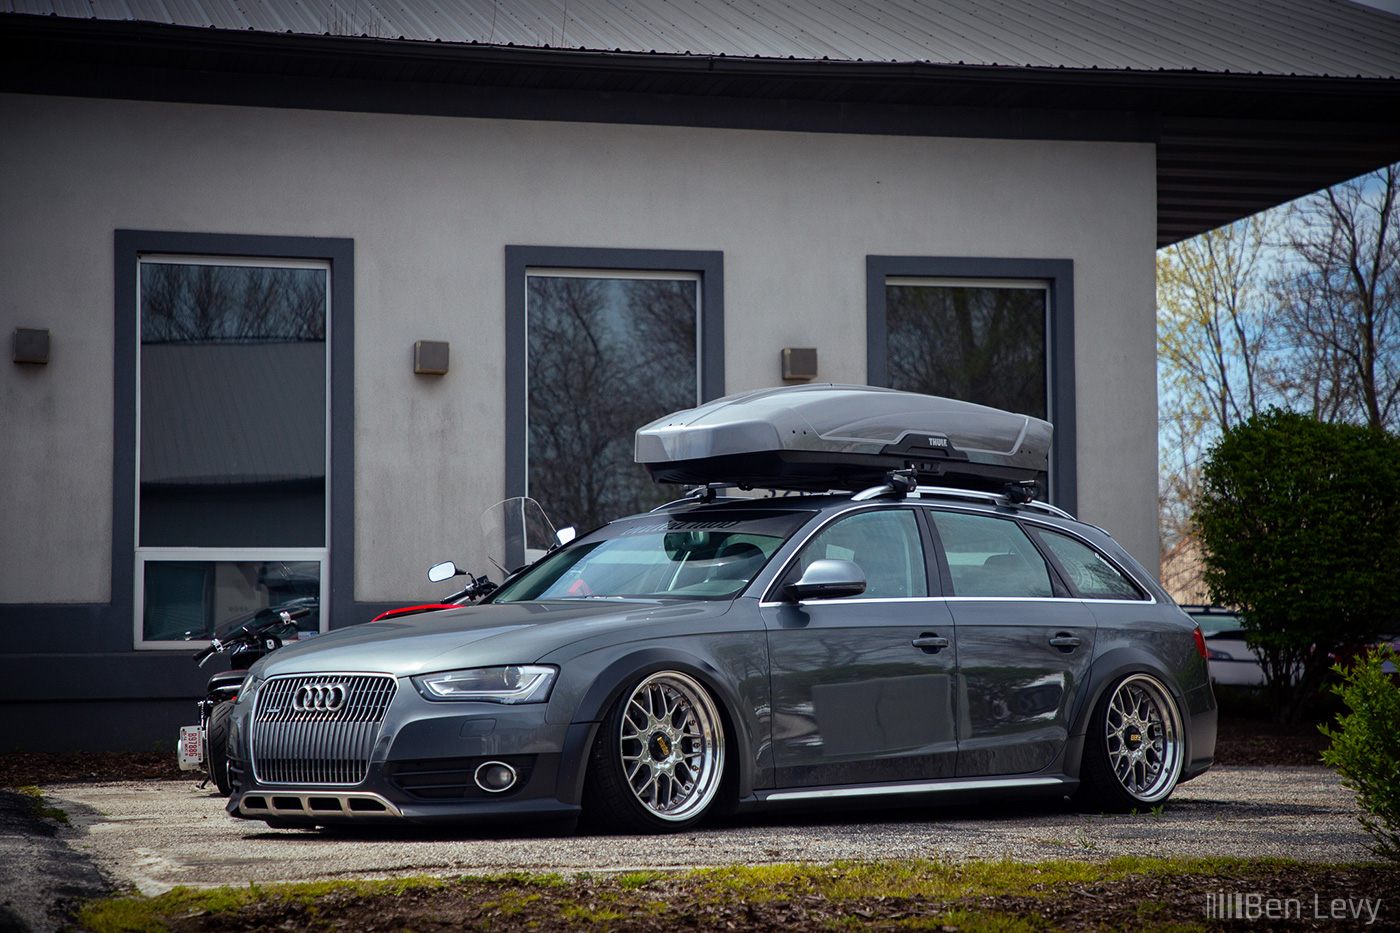 Slammed Audi Allroad at Drivers' Gallery in Indiana